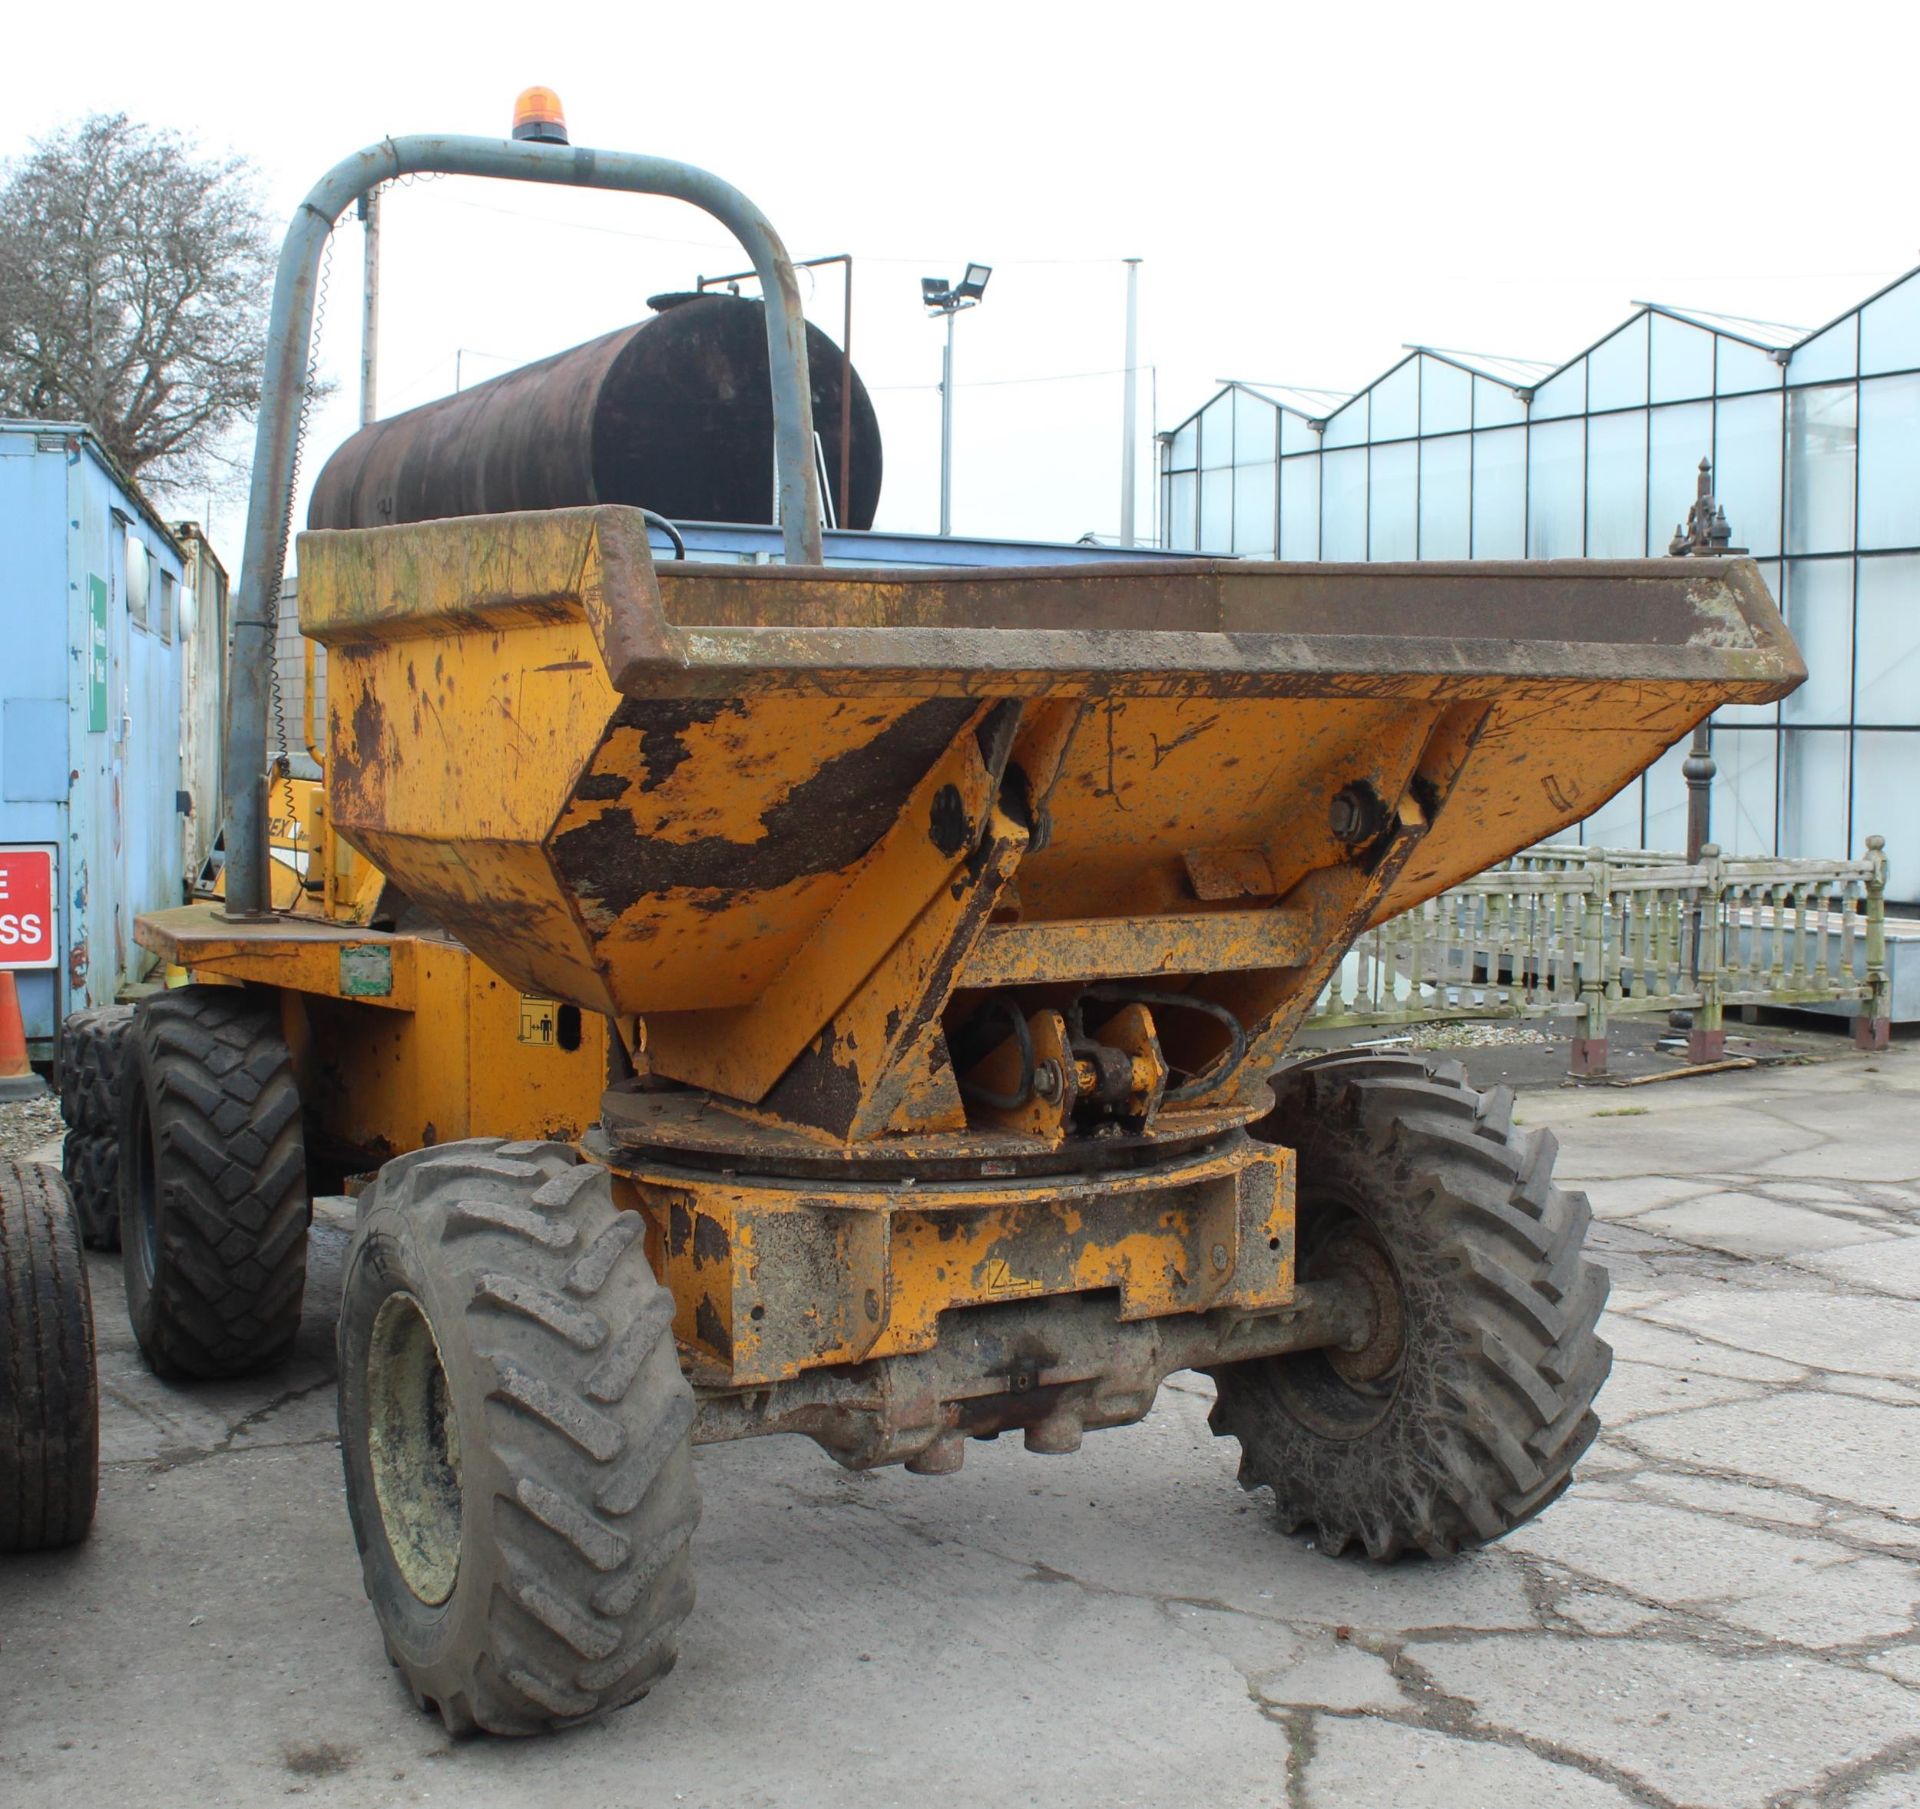 BENFORD TEREX 3 TONNE SWIVEL DUMPER STARTS RUNS WELL EVERYTHING OPERATES CORRECTLY RECENT NEW CLUTCH